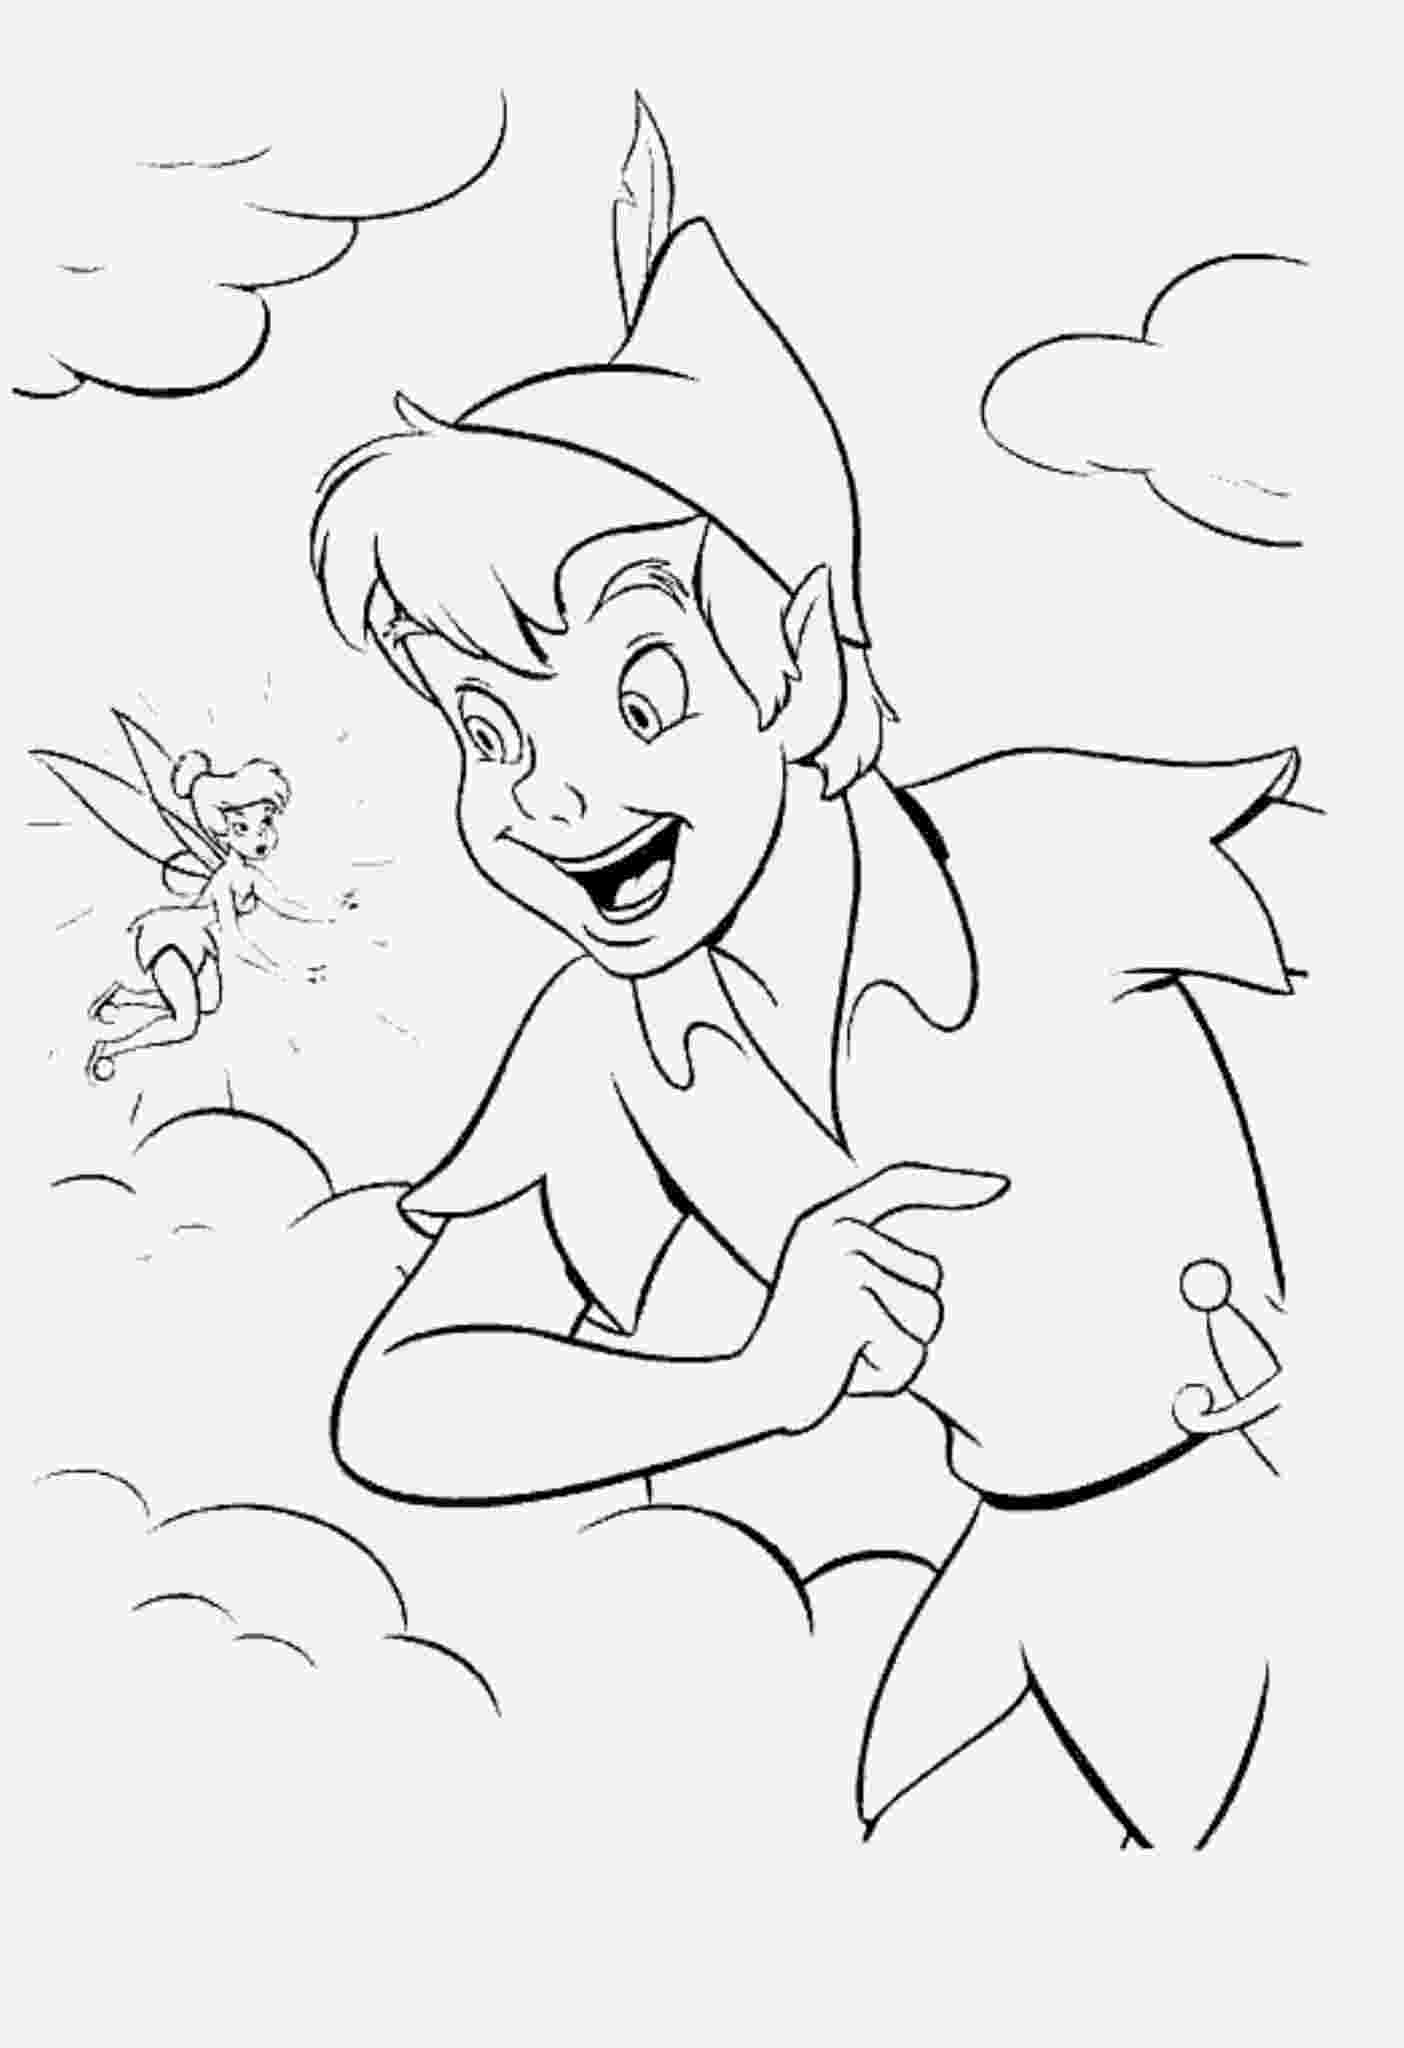 peter pan coloring pages free print download fun peter pan coloring pages downloaded free peter pan coloring pages 